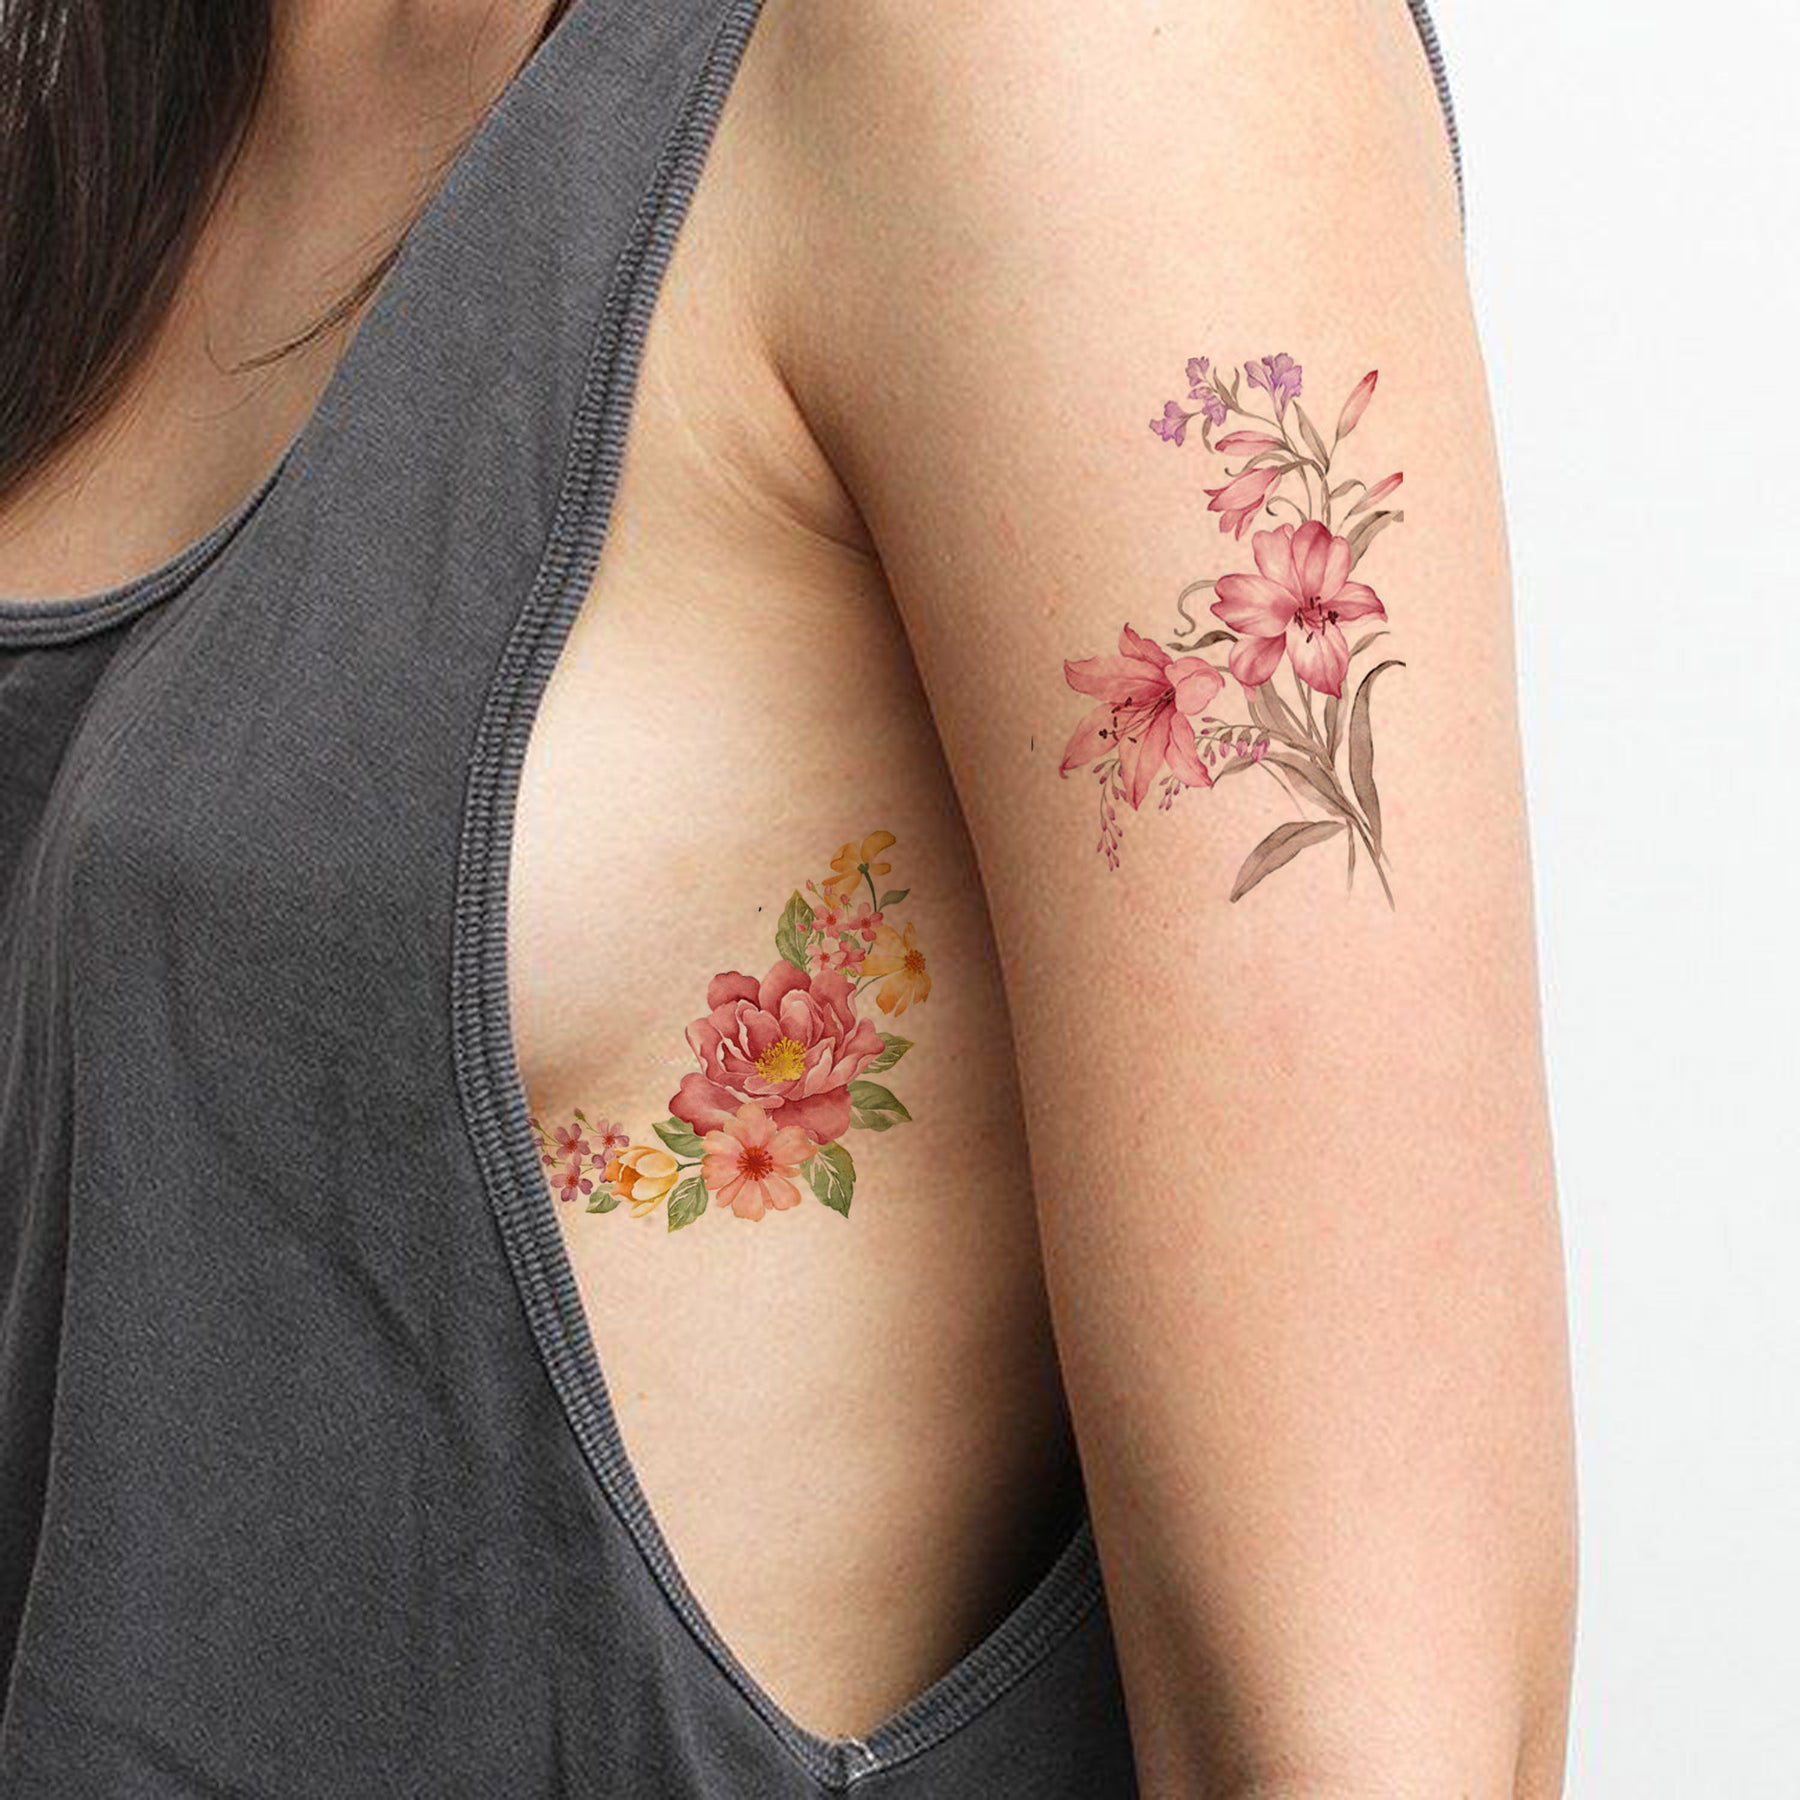 Temporary Tattoos Gentle Flowers  Vintage Flower Tattoo PNG Image   Transparent PNG Free Download on SeekPNG